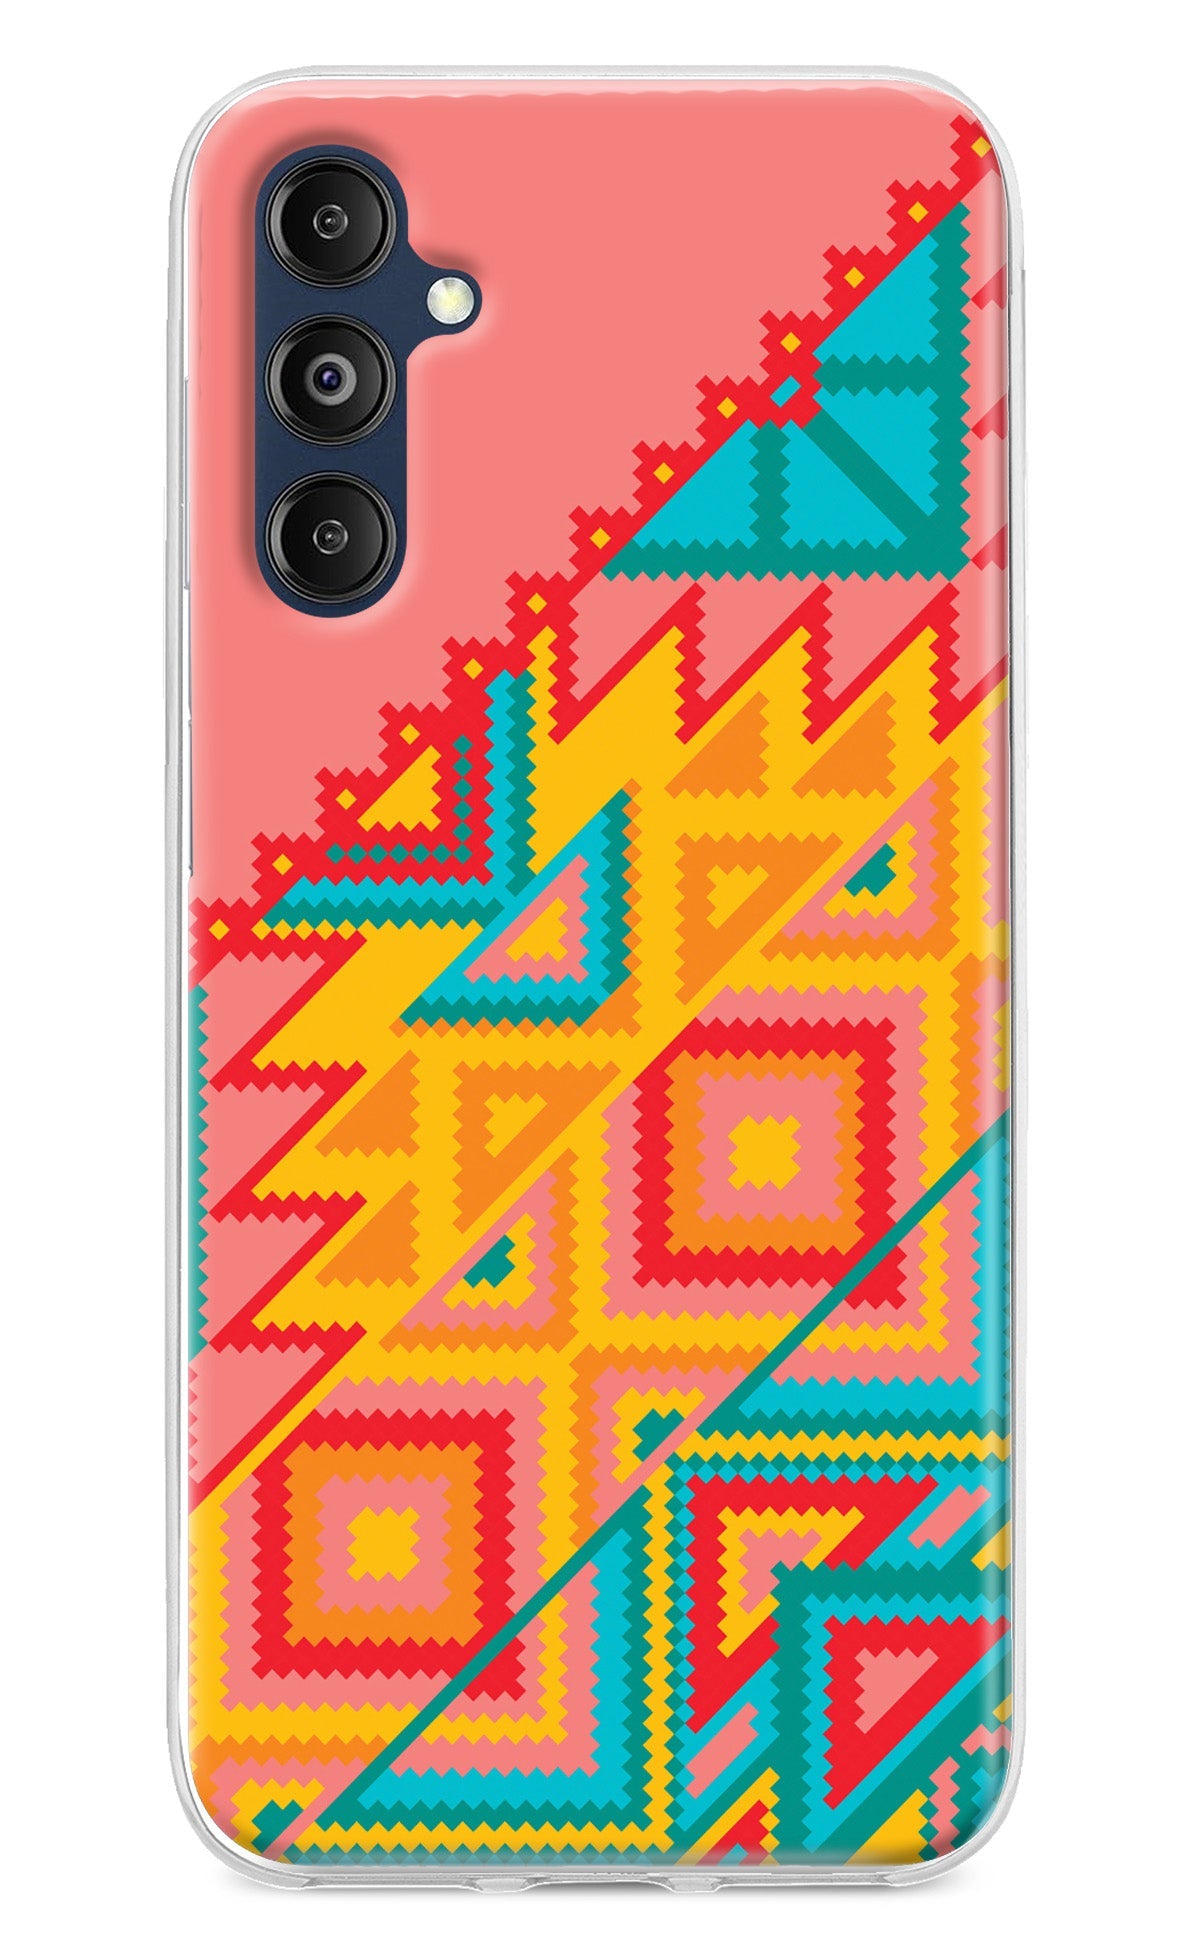 Aztec Tribal Samsung M14 Back Cover